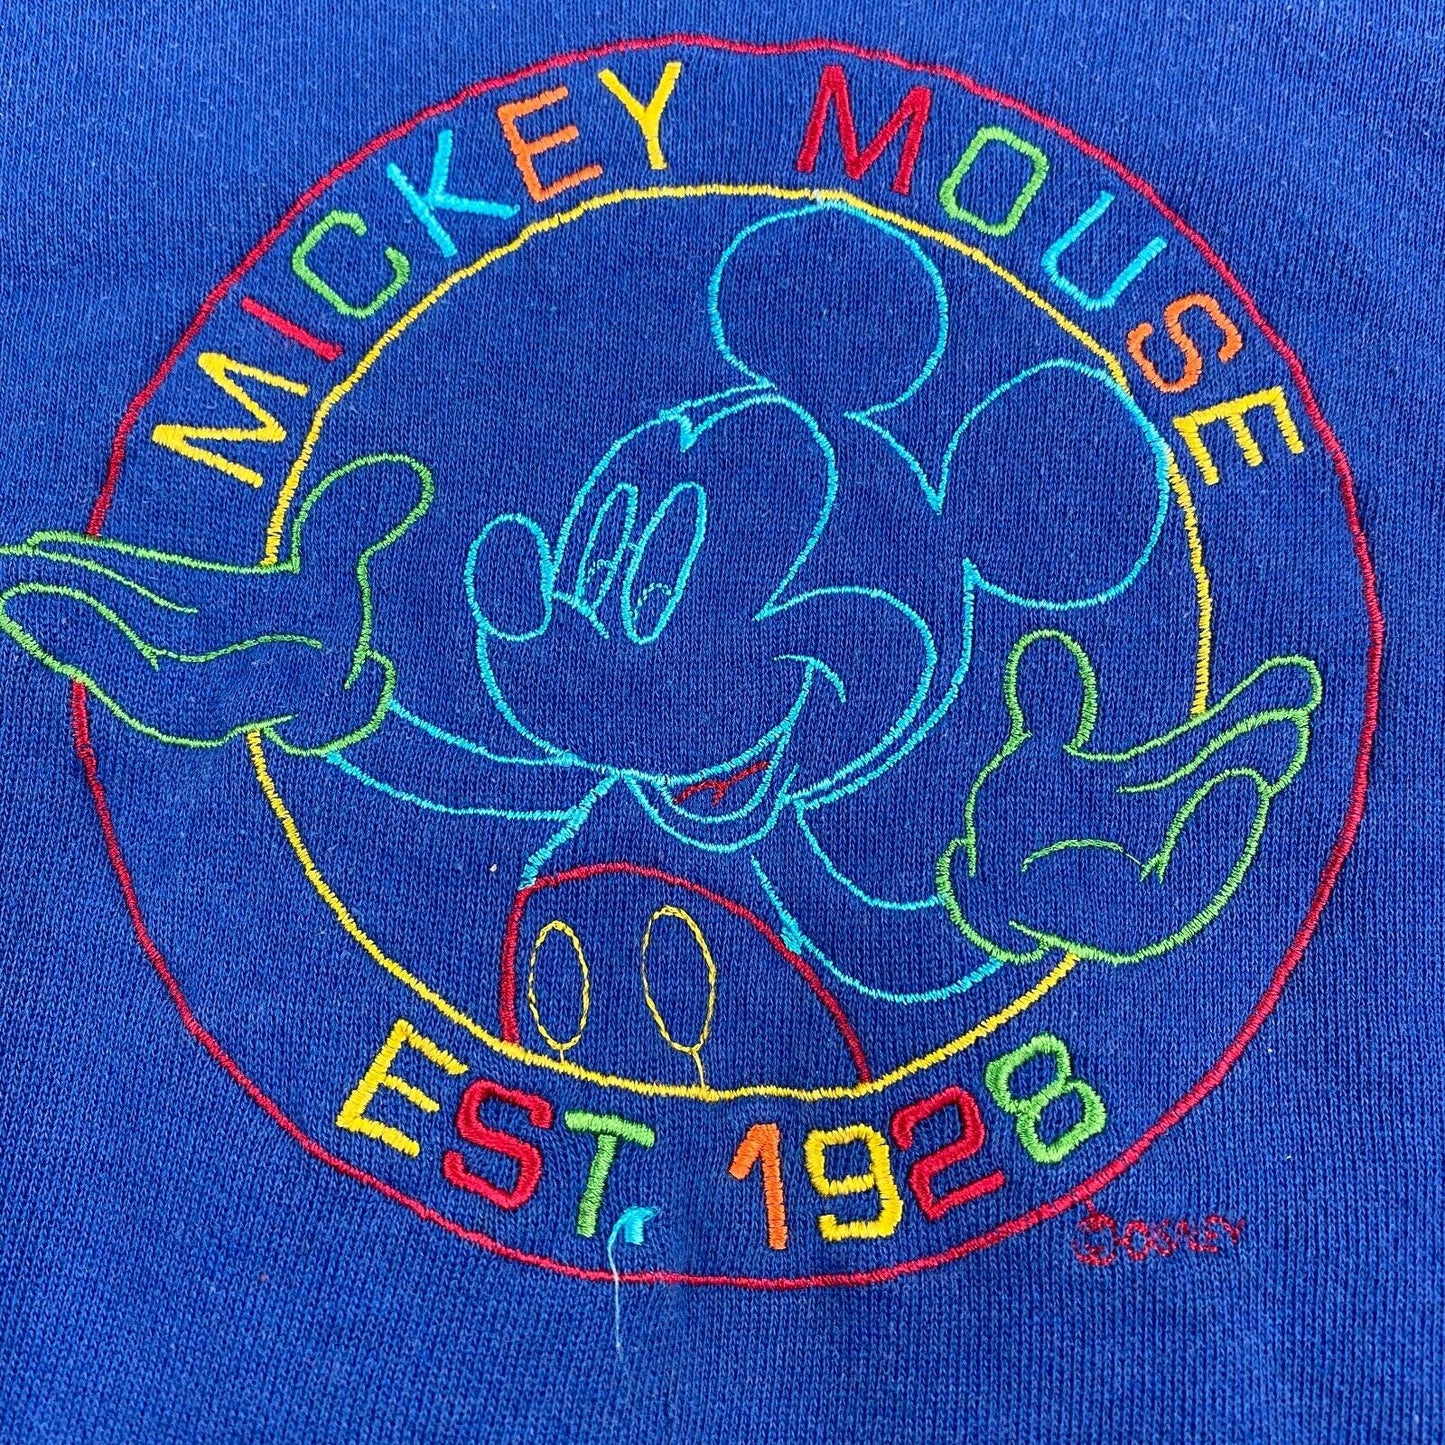 VINTAGE 80s Mickey Mouse Embroidered Crewneck Sweater sz XL Mens